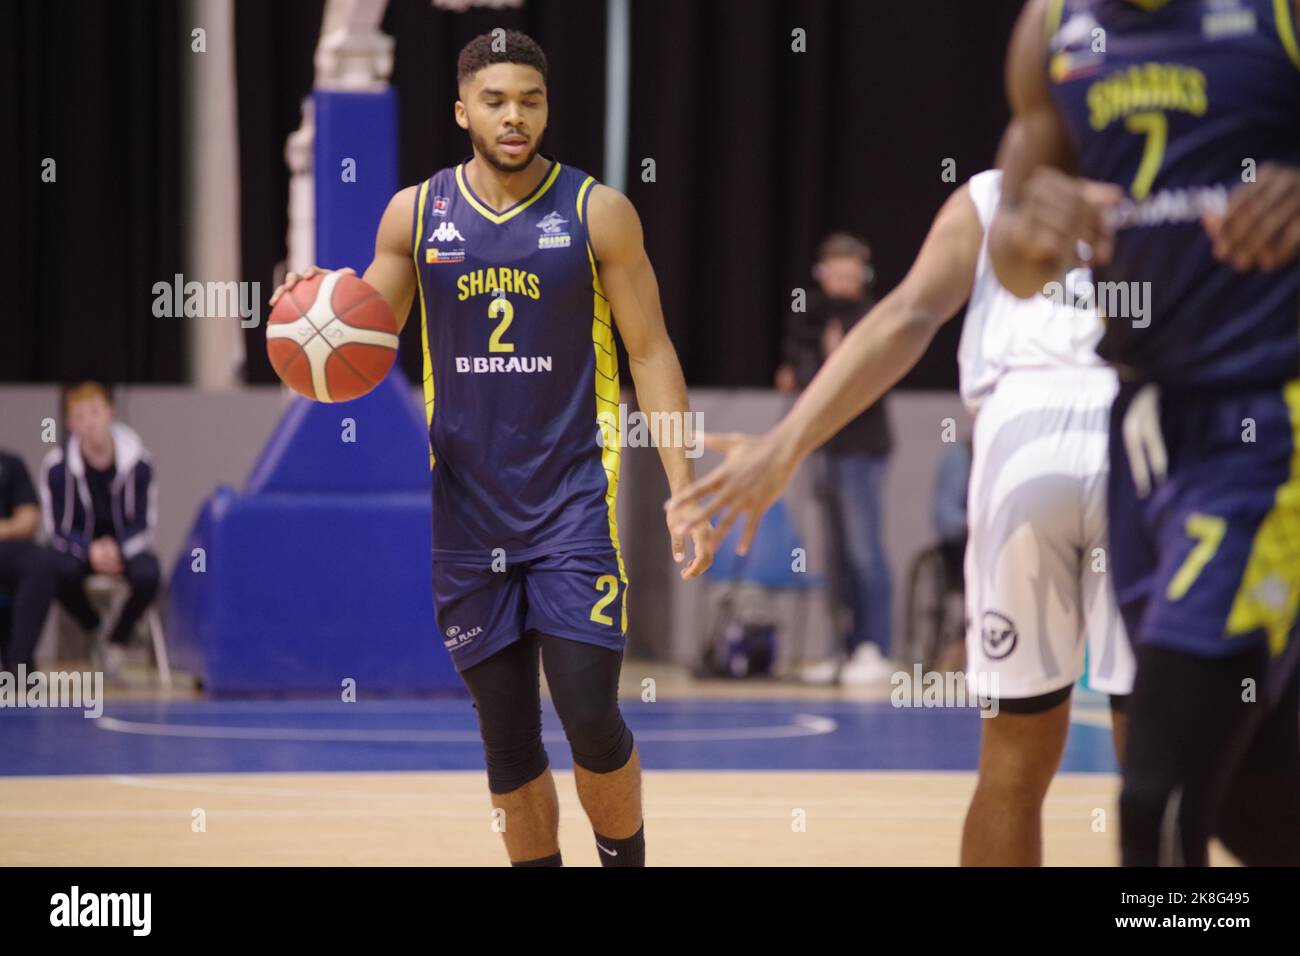 Sheffield, England, 23 October 2022. Saeed Nelson playing for B. Braun Sheffield Sharks against Newcastle Eagles in a BBL match at Ponds Forge. Credit: Colin Edwards/Alamy Live News. Stock Photo